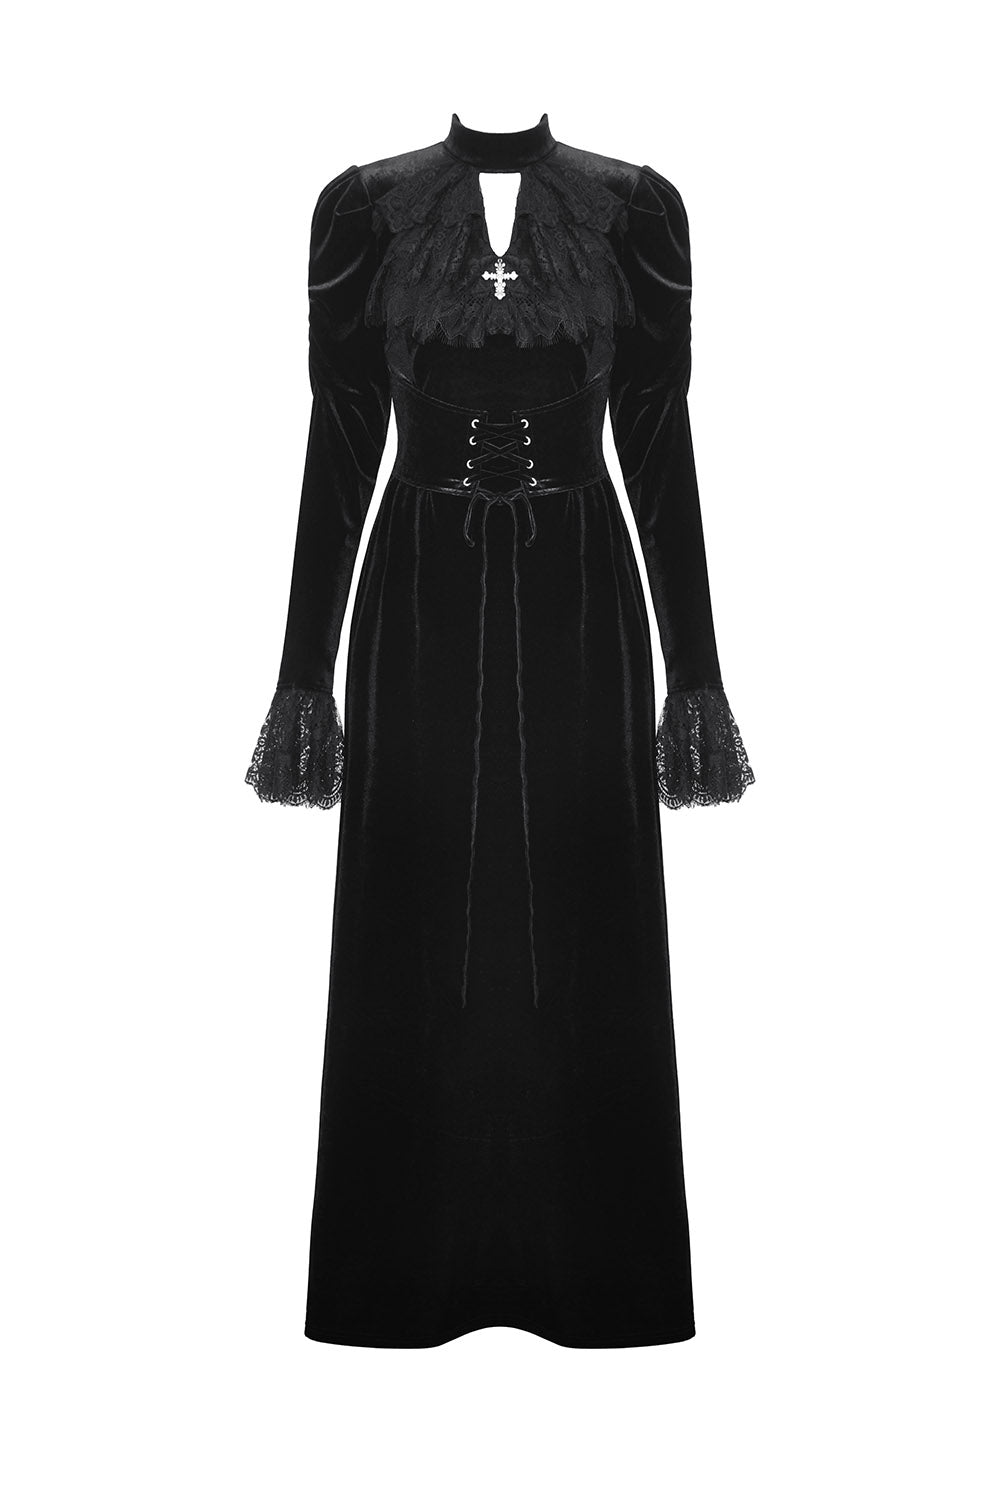 womens black victorian gothic lace dress